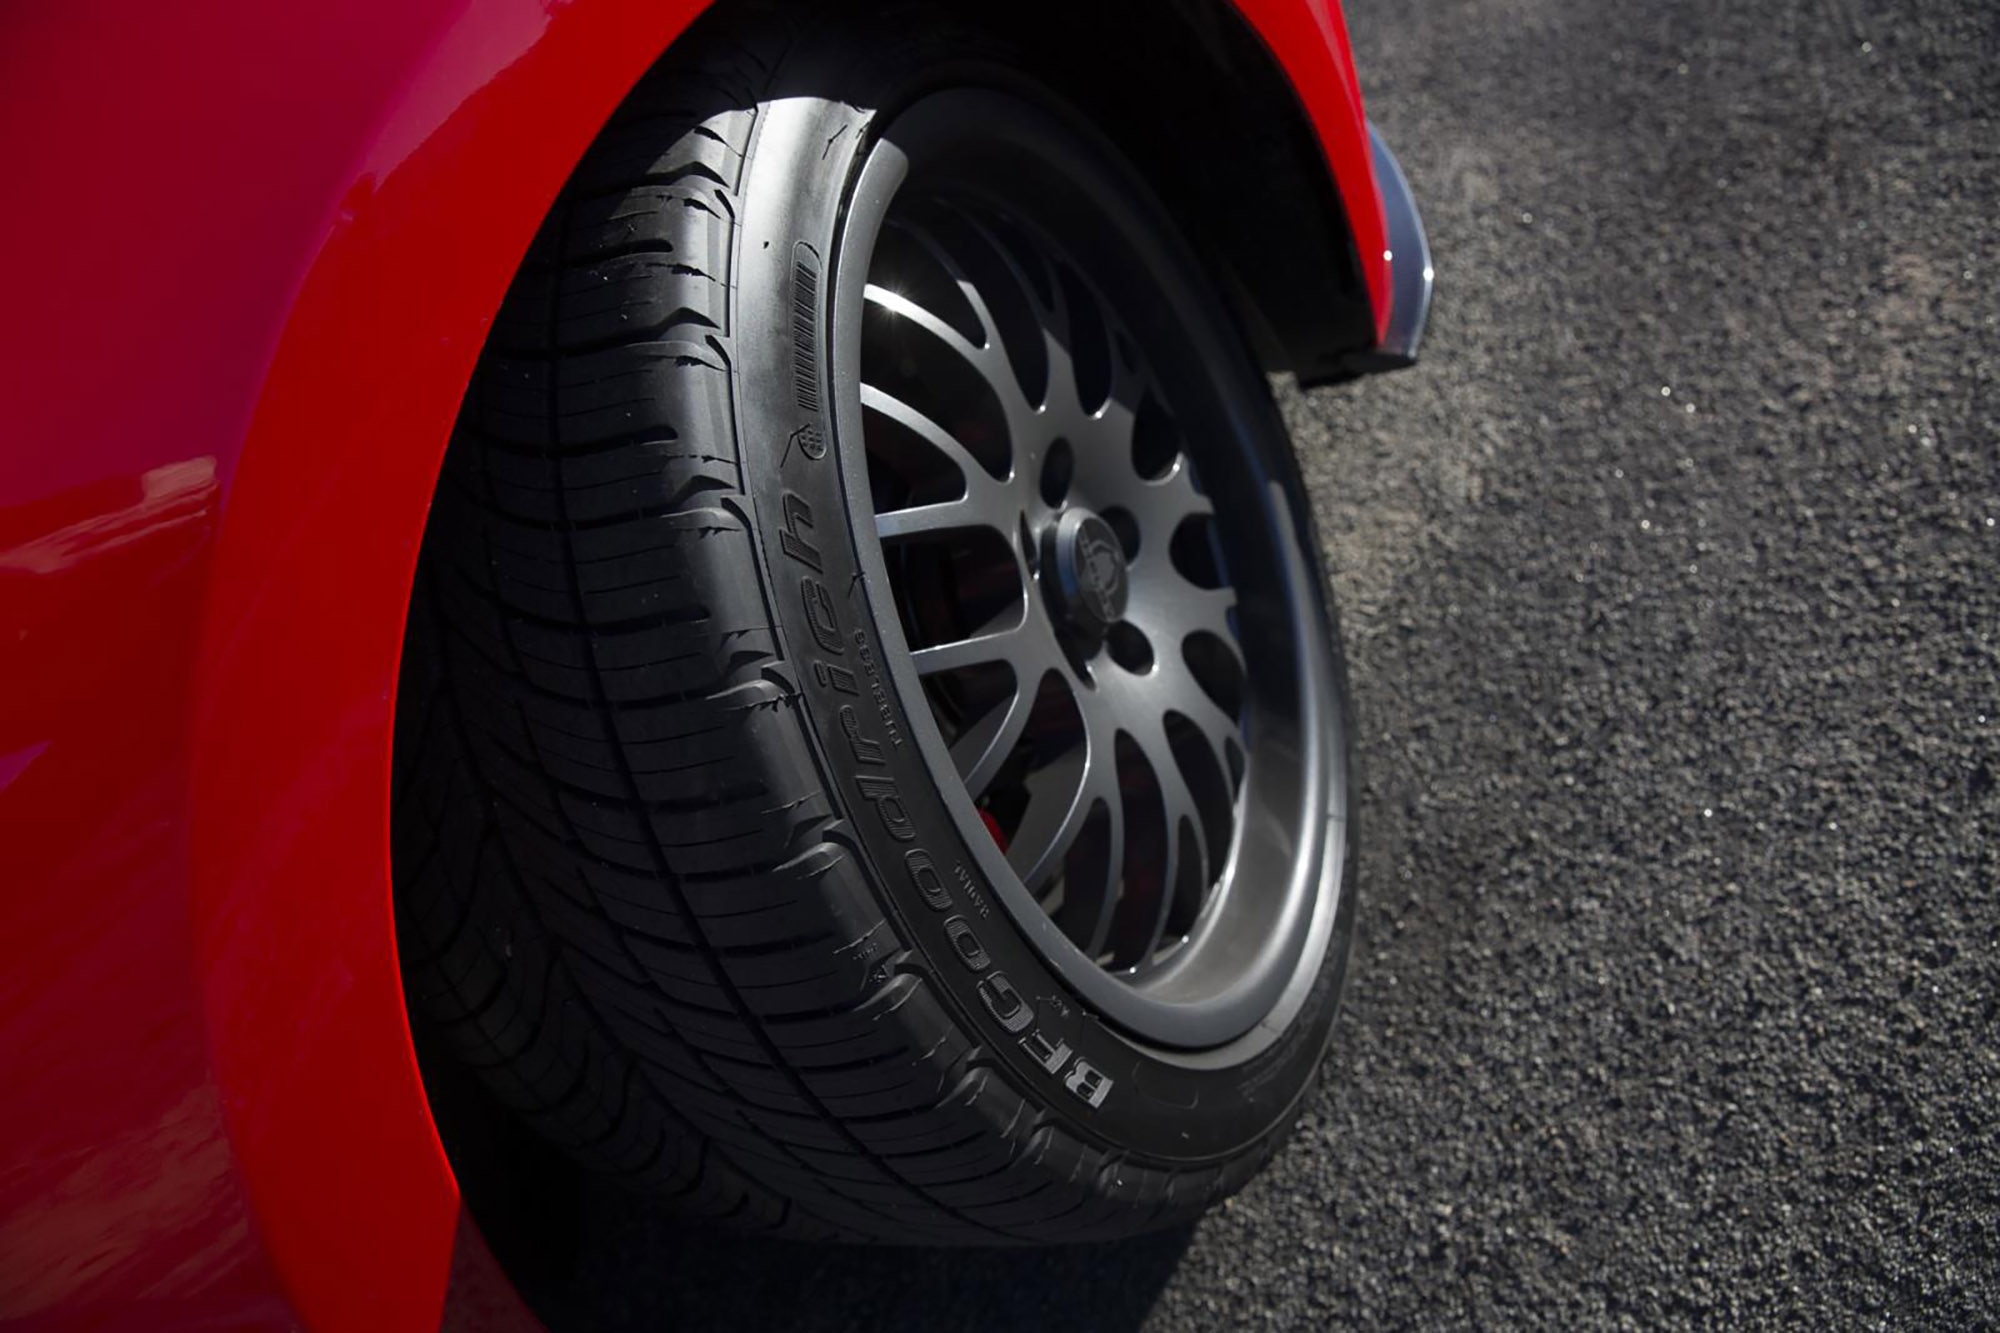 Detail shot of BFGoodrich g-Force COMP-2 all-season tire on a red Ford Mustang